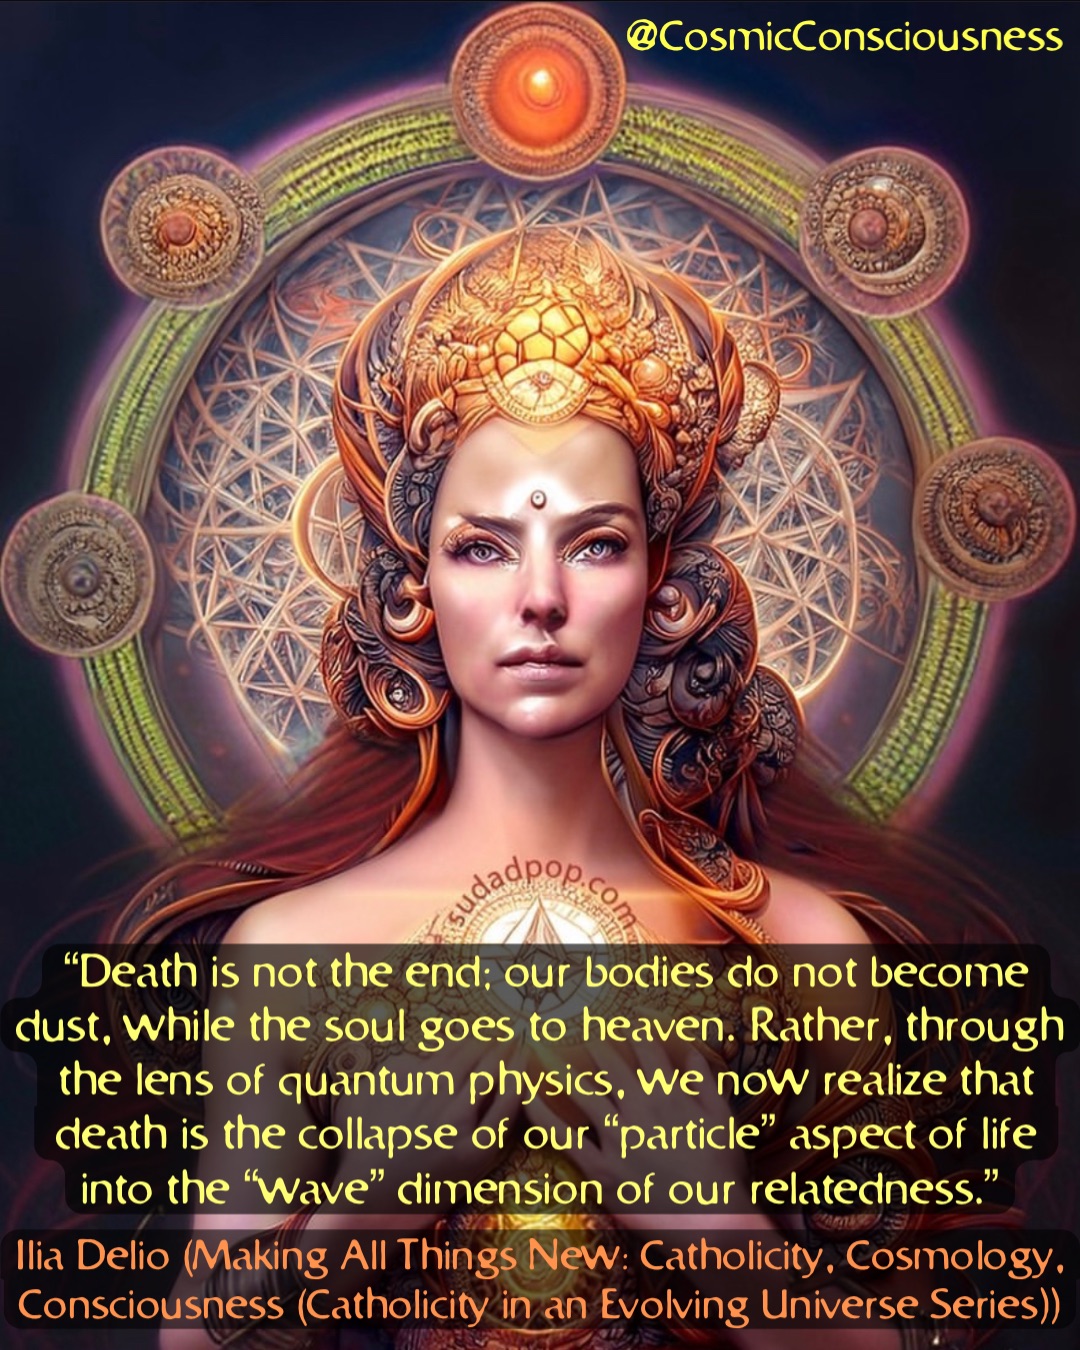 “Death is not the end; our bodies do not become dust, while the soul goes to heaven. Rather, through the lens of quantum physics, we now realize that death is the collapse of our “particle” aspect of life into the “wave” dimension of our relatedness.” Ilia Delio (Making All Things New: Catholicity, Cosmology, Consciousness (Catholicity in an Evolving Universe Series)) @CosmicConsciousness